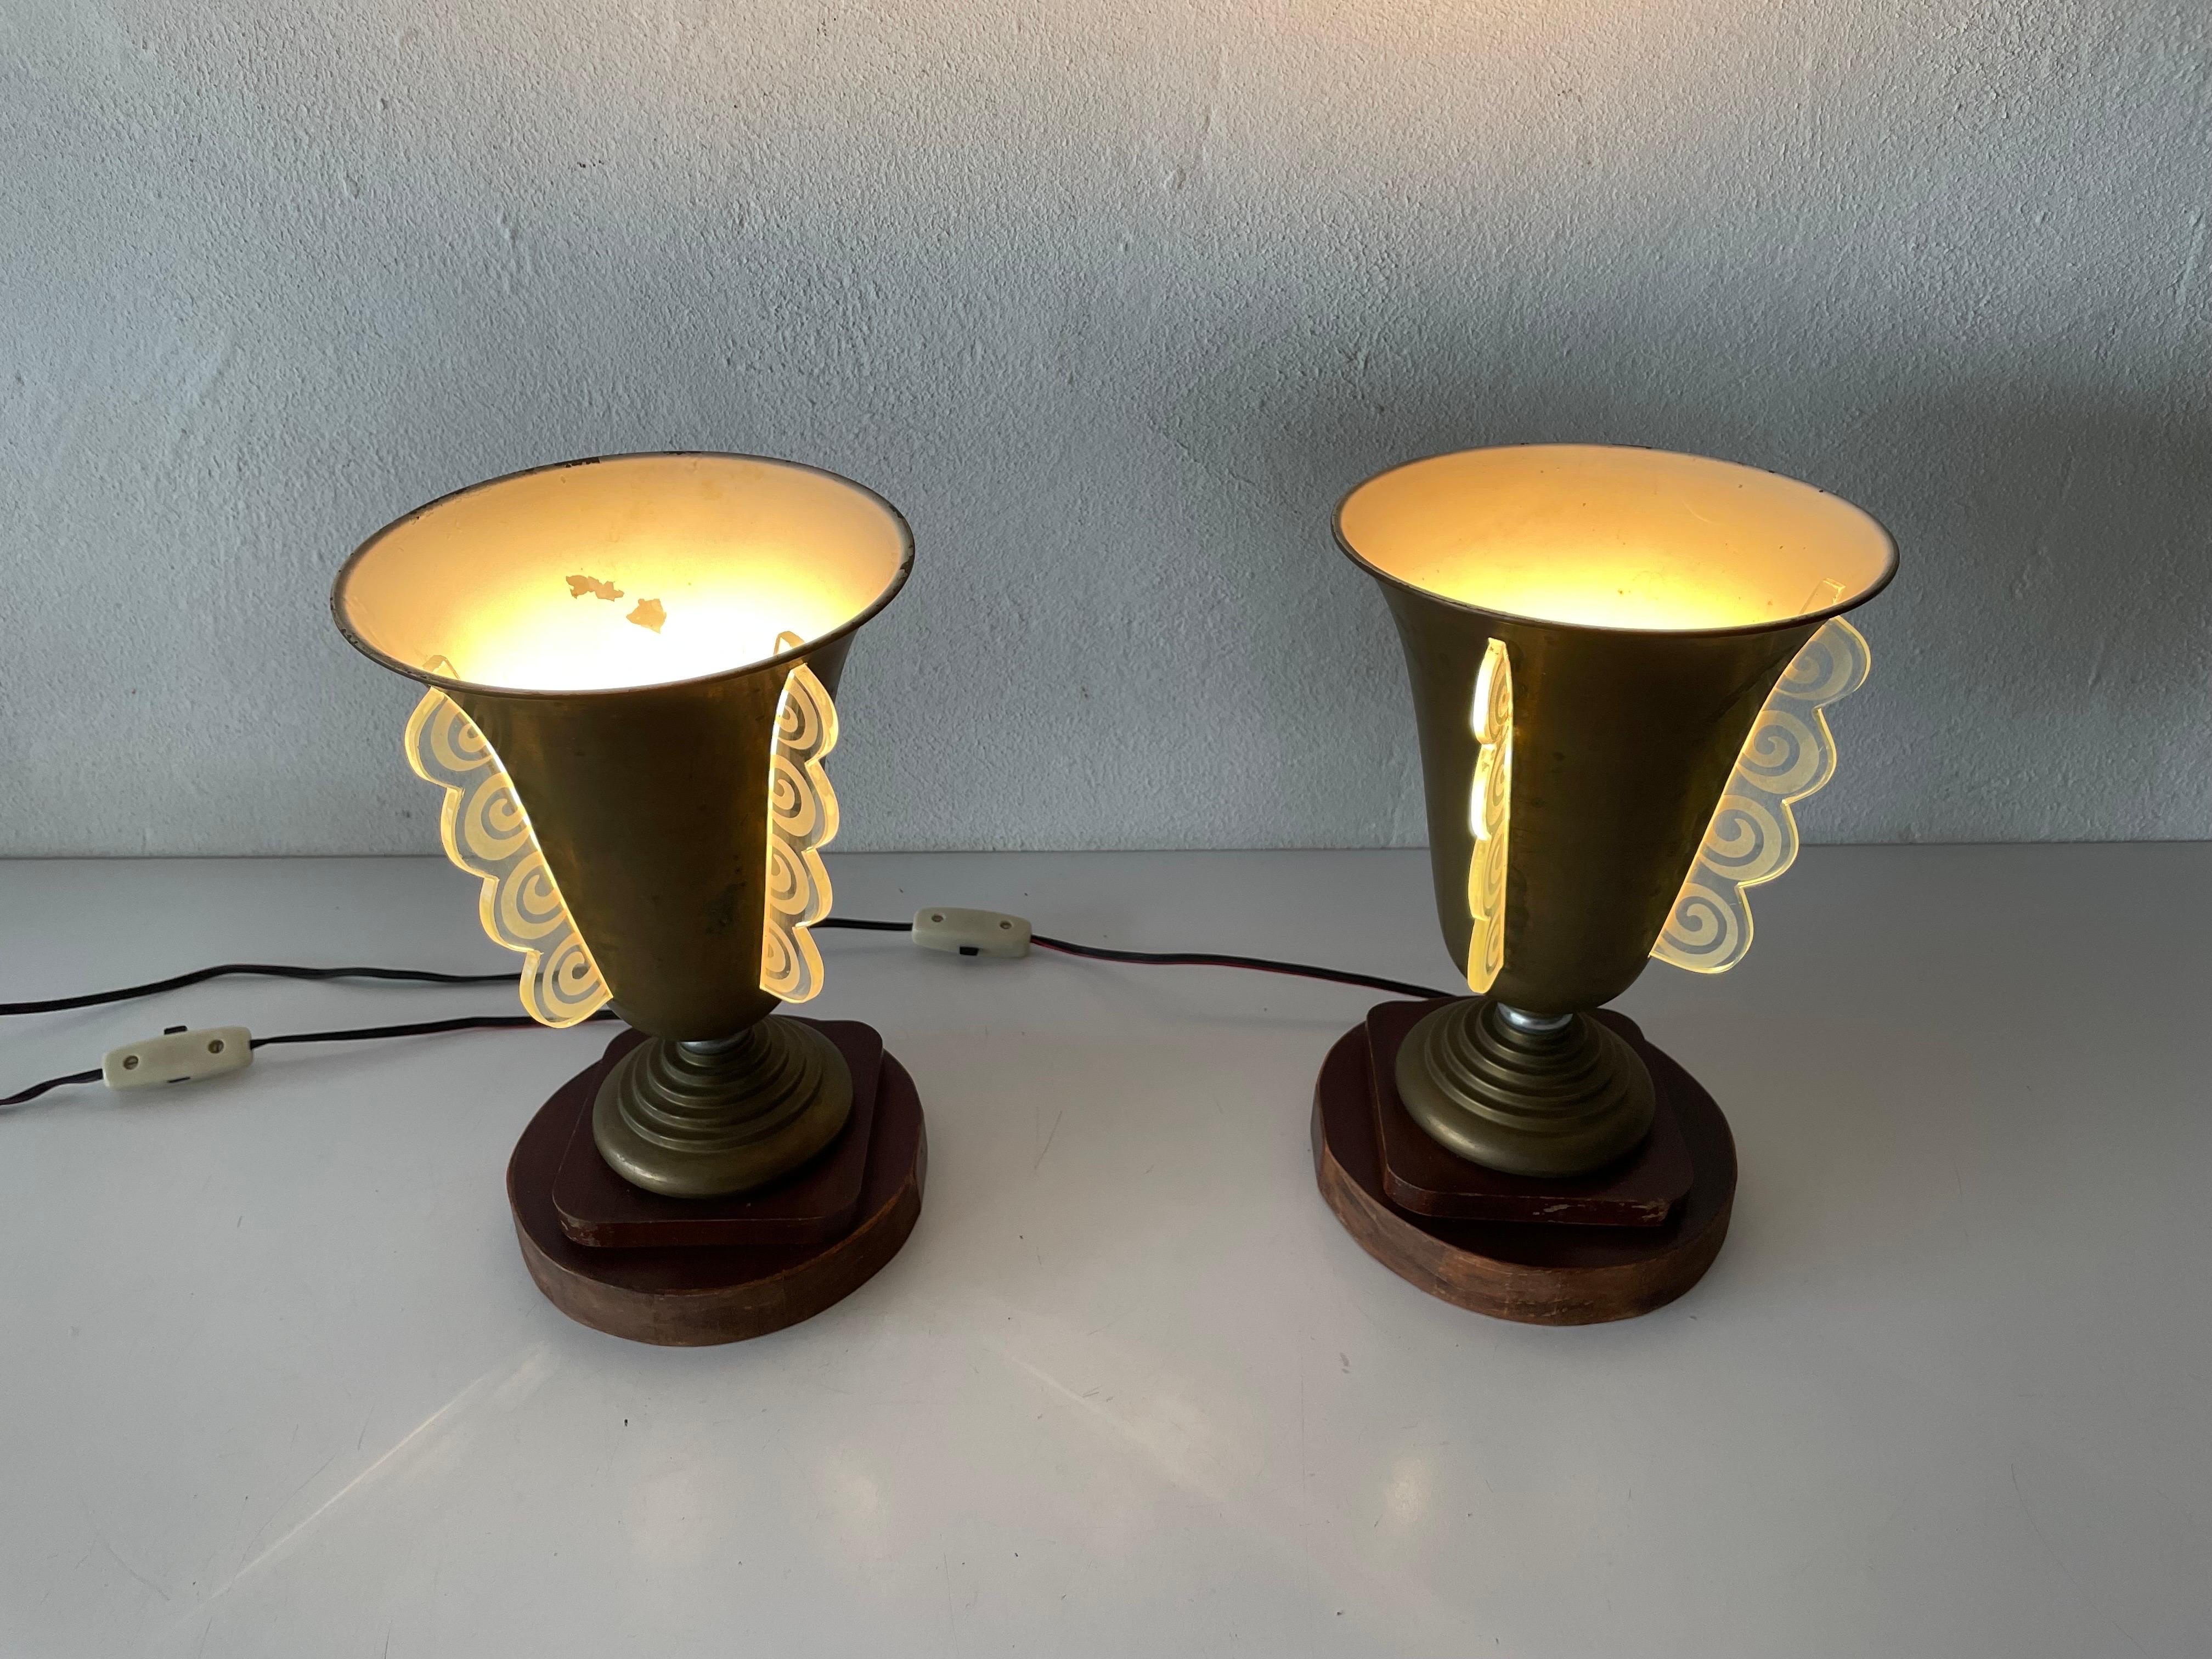 Art Deco Conic Design Pair of Table Lamps by Mazda, 1940s, France For Sale 7